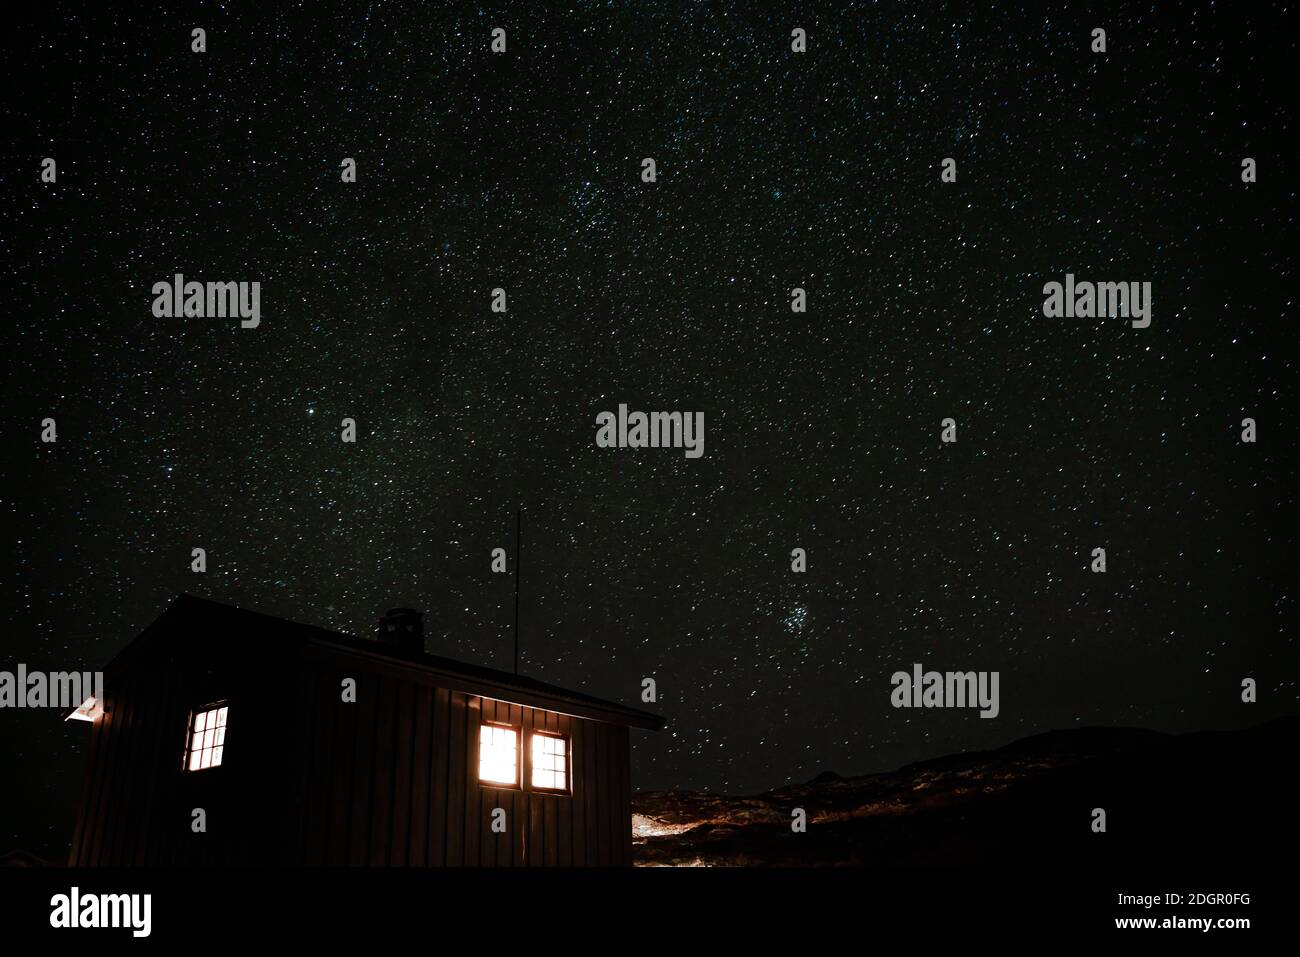 Small cabin in the mountains with light shining out the windows and a starry night sky in the background. Time lapse video.  Stock Photo